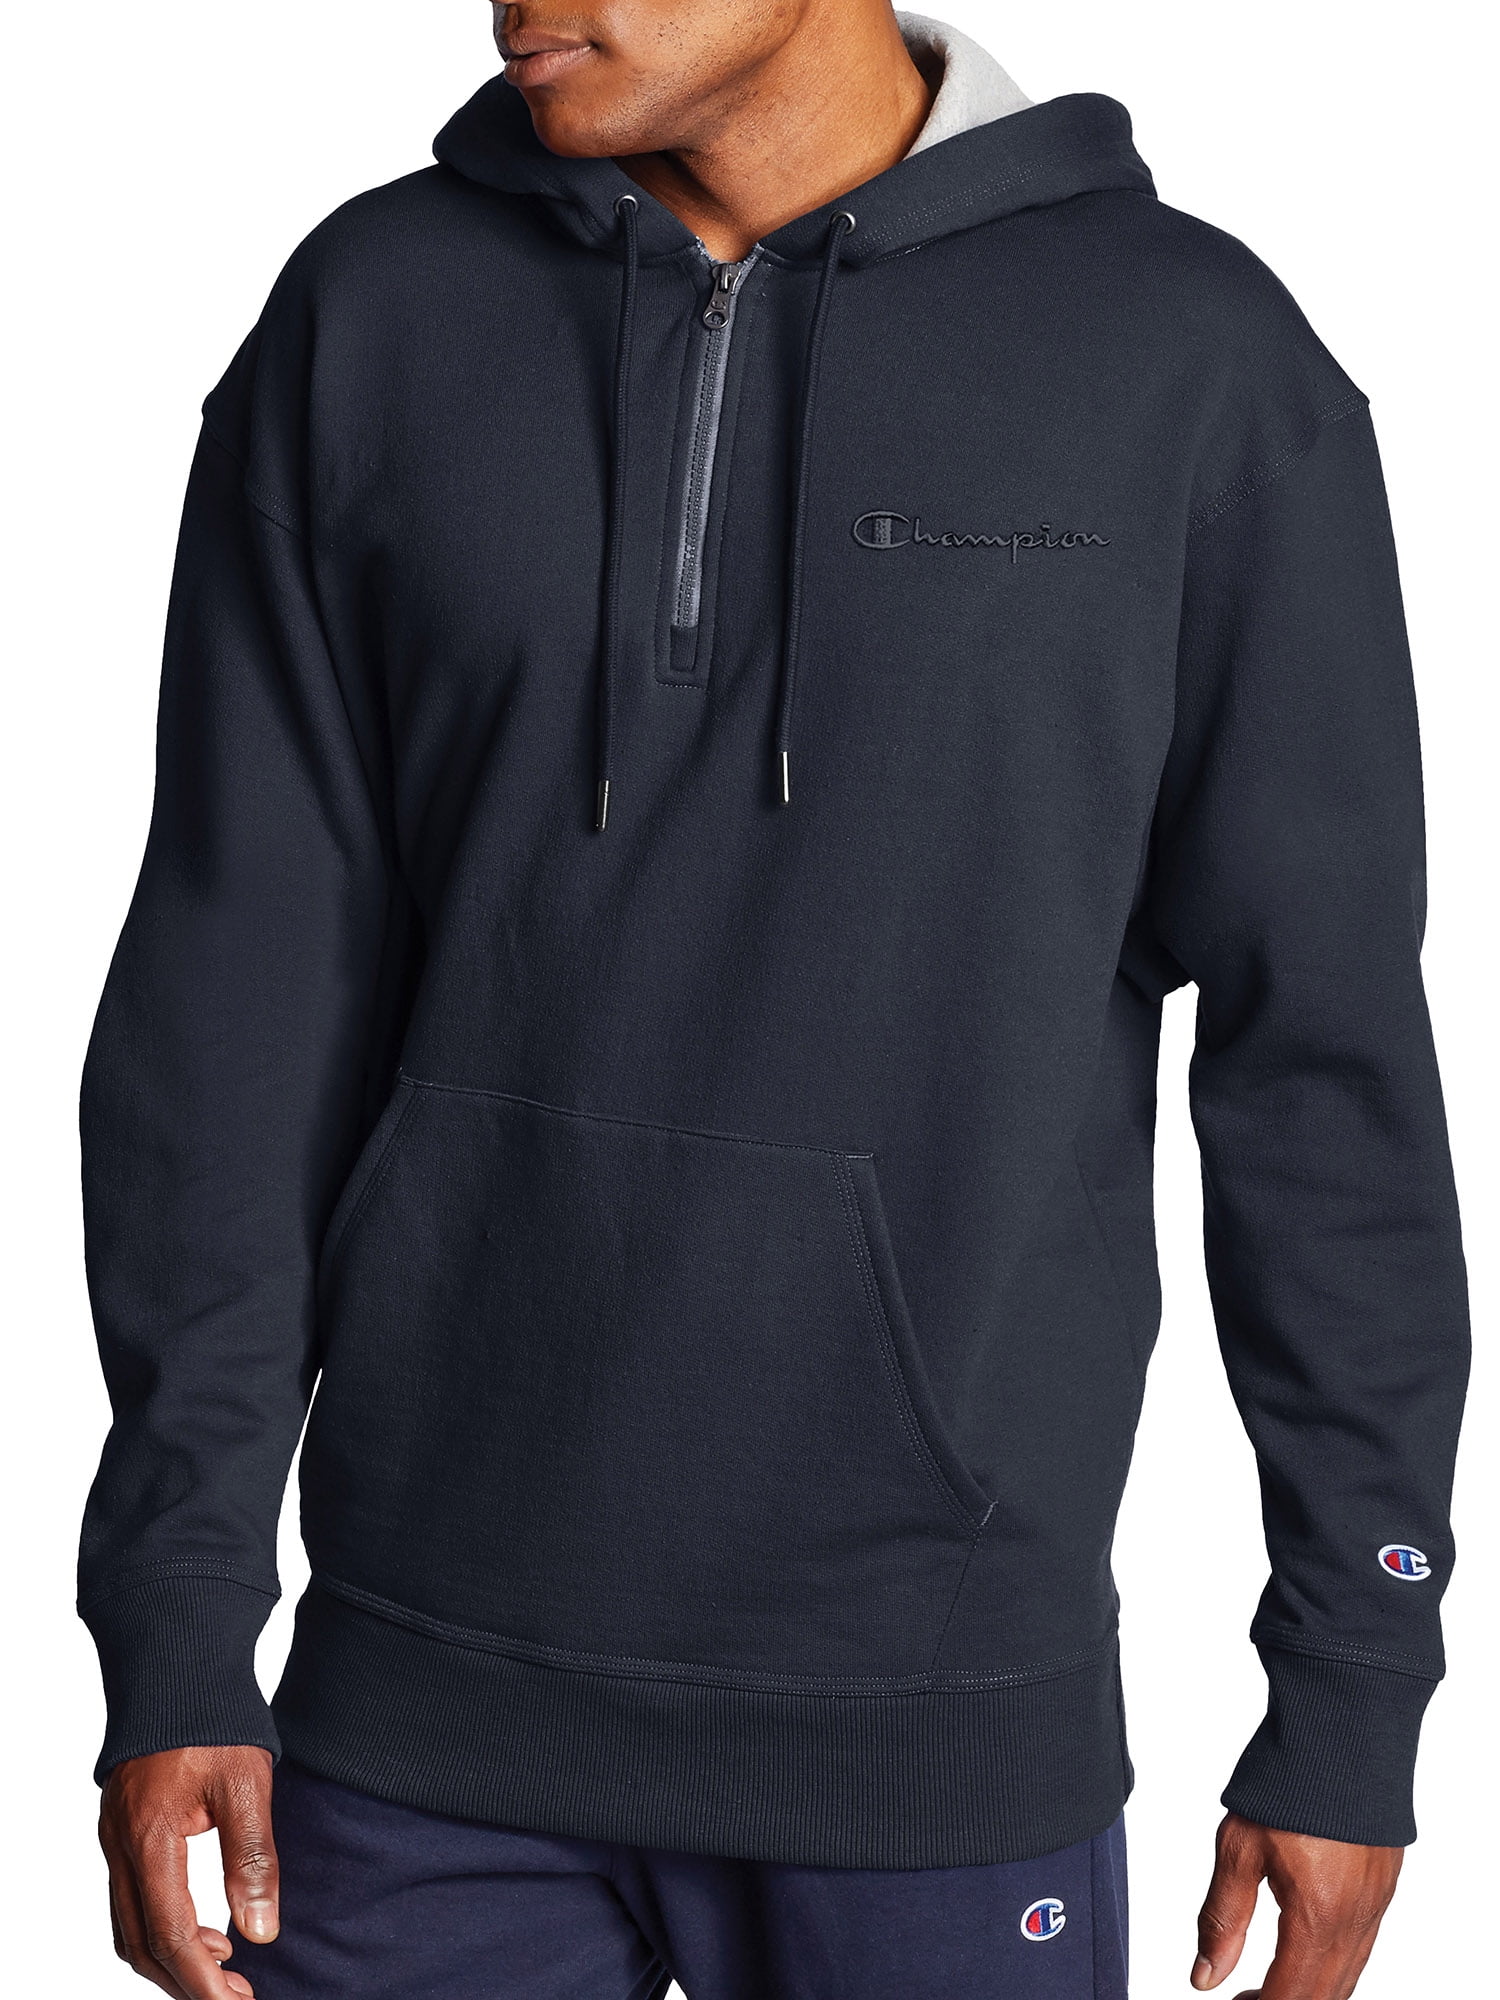 Champion Men S Powerblend Fleece Quarter Zip Hoodie With Embroidered Logo Up To Size 2xl